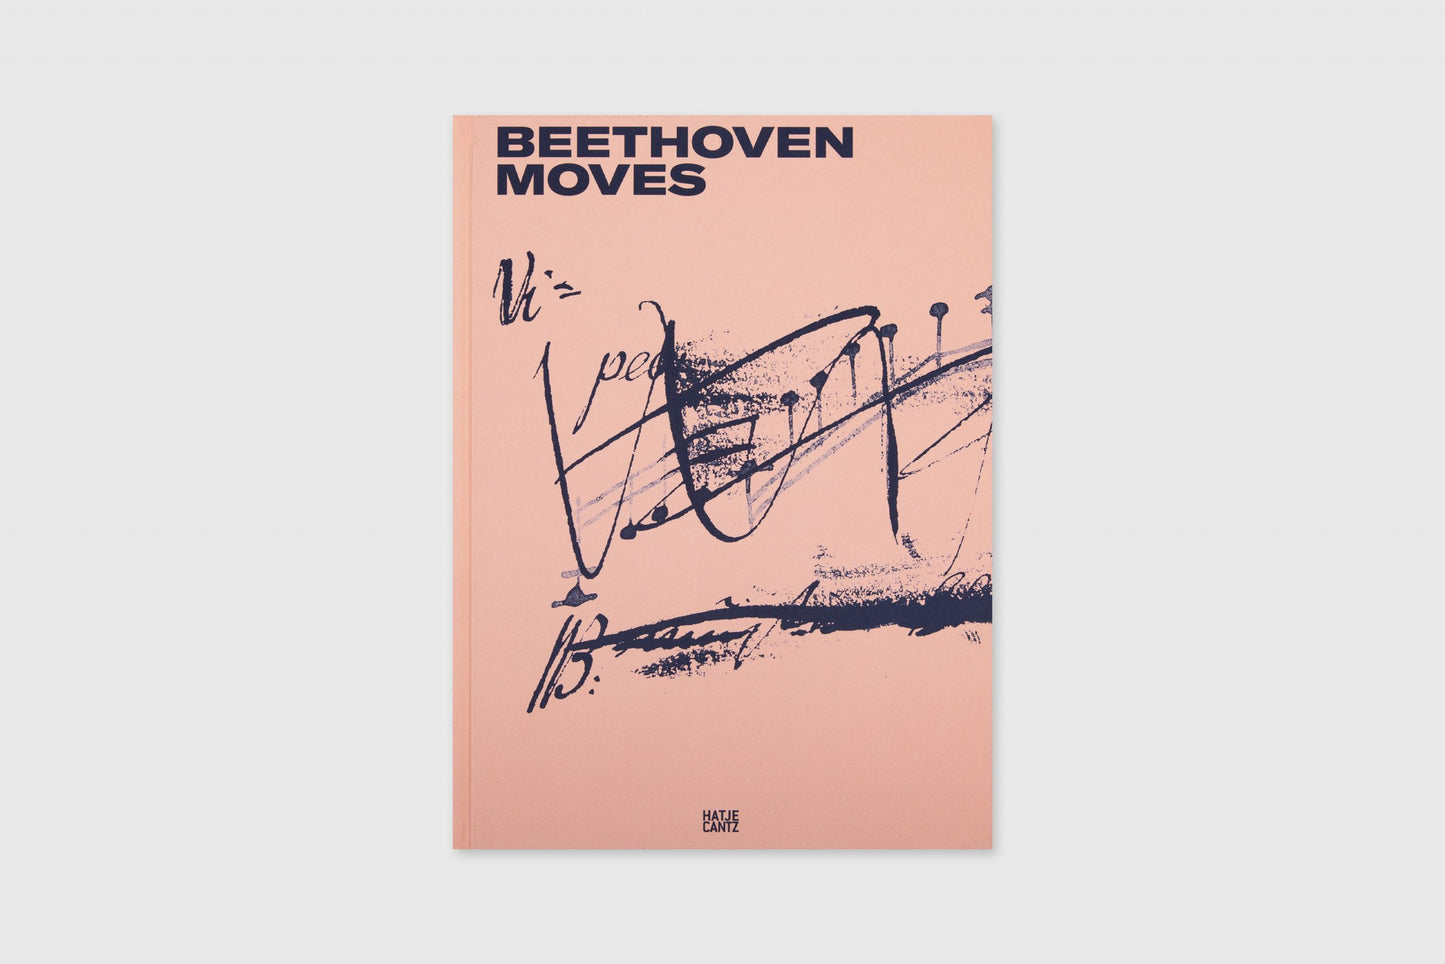 Beethoven Moves